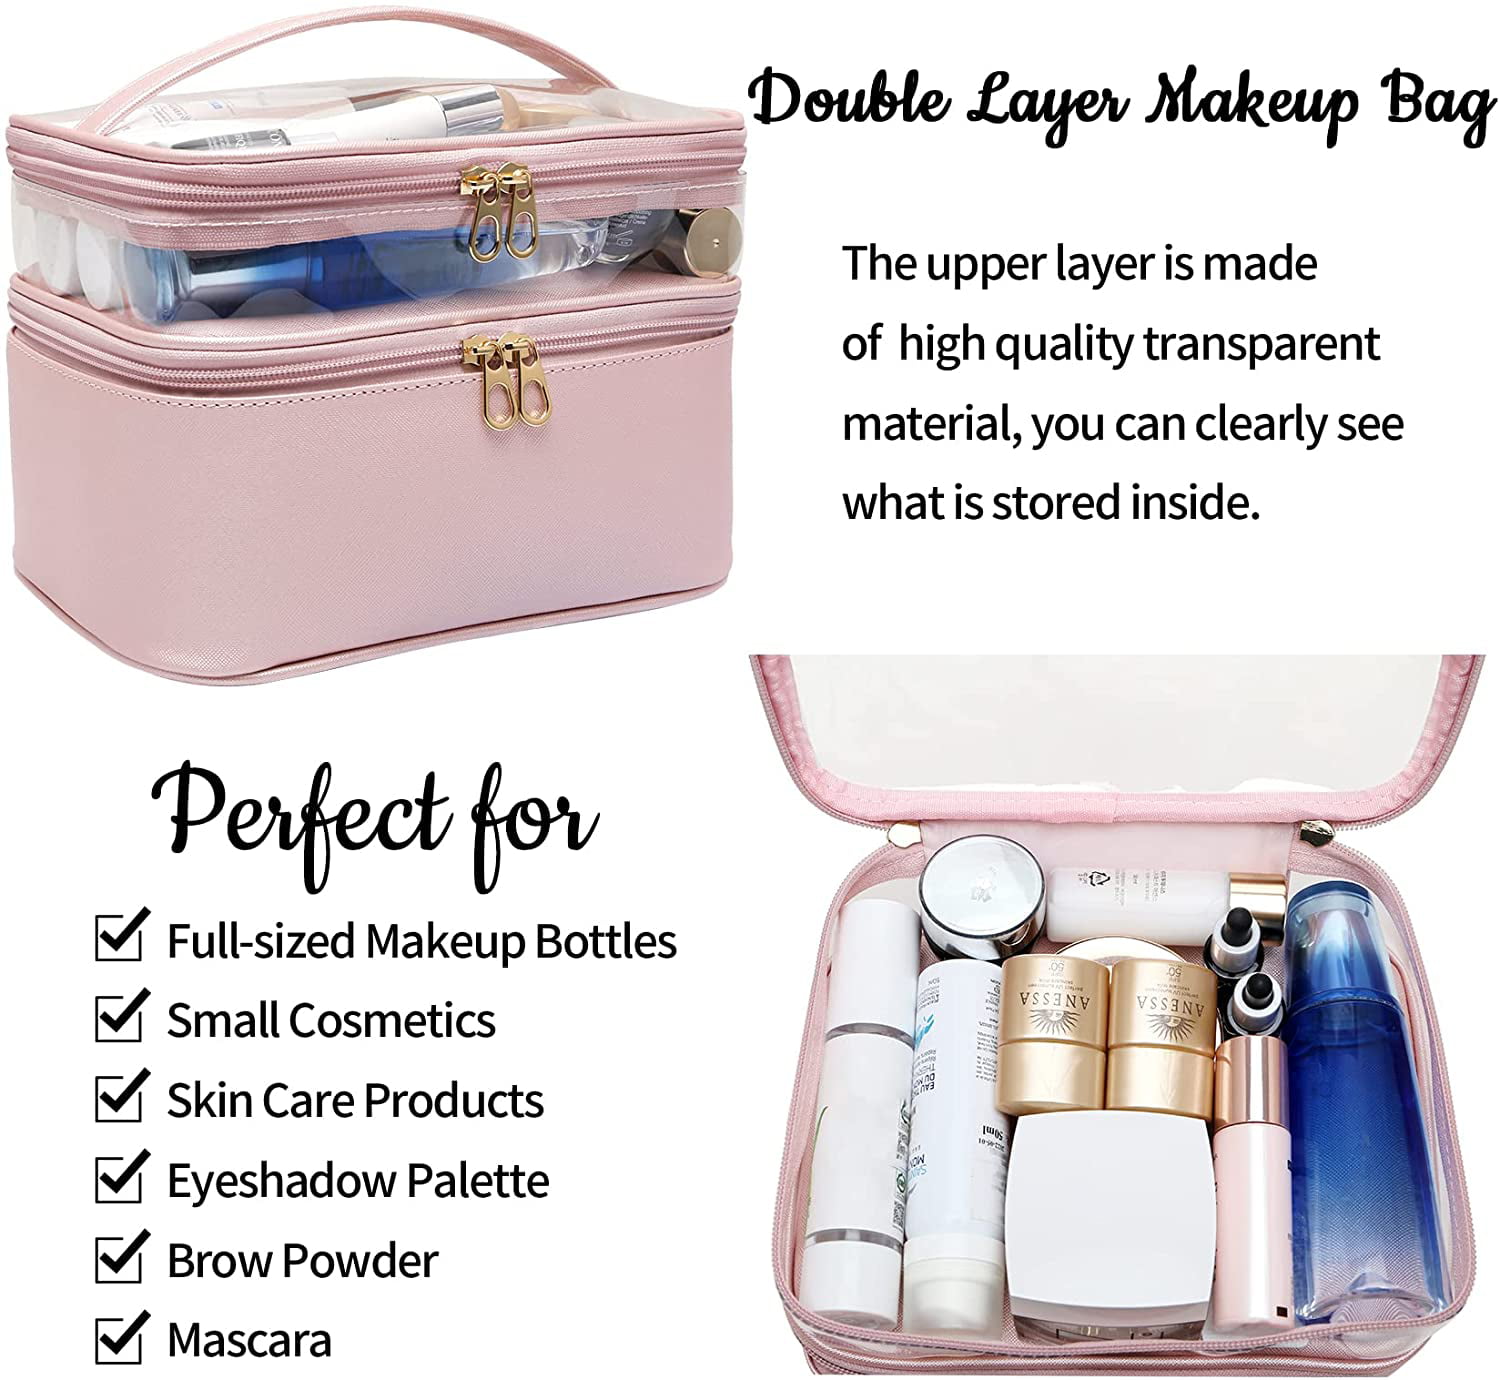 Makeup Bag,Leather Double Layer Large Makeup Organizer Bag,Travel  Accessories Dorm Room Essentials Toiletry Bag for Women,Travel Essentials Cosmetic  Bag Makeup Case with Detachable Divider for Brush 